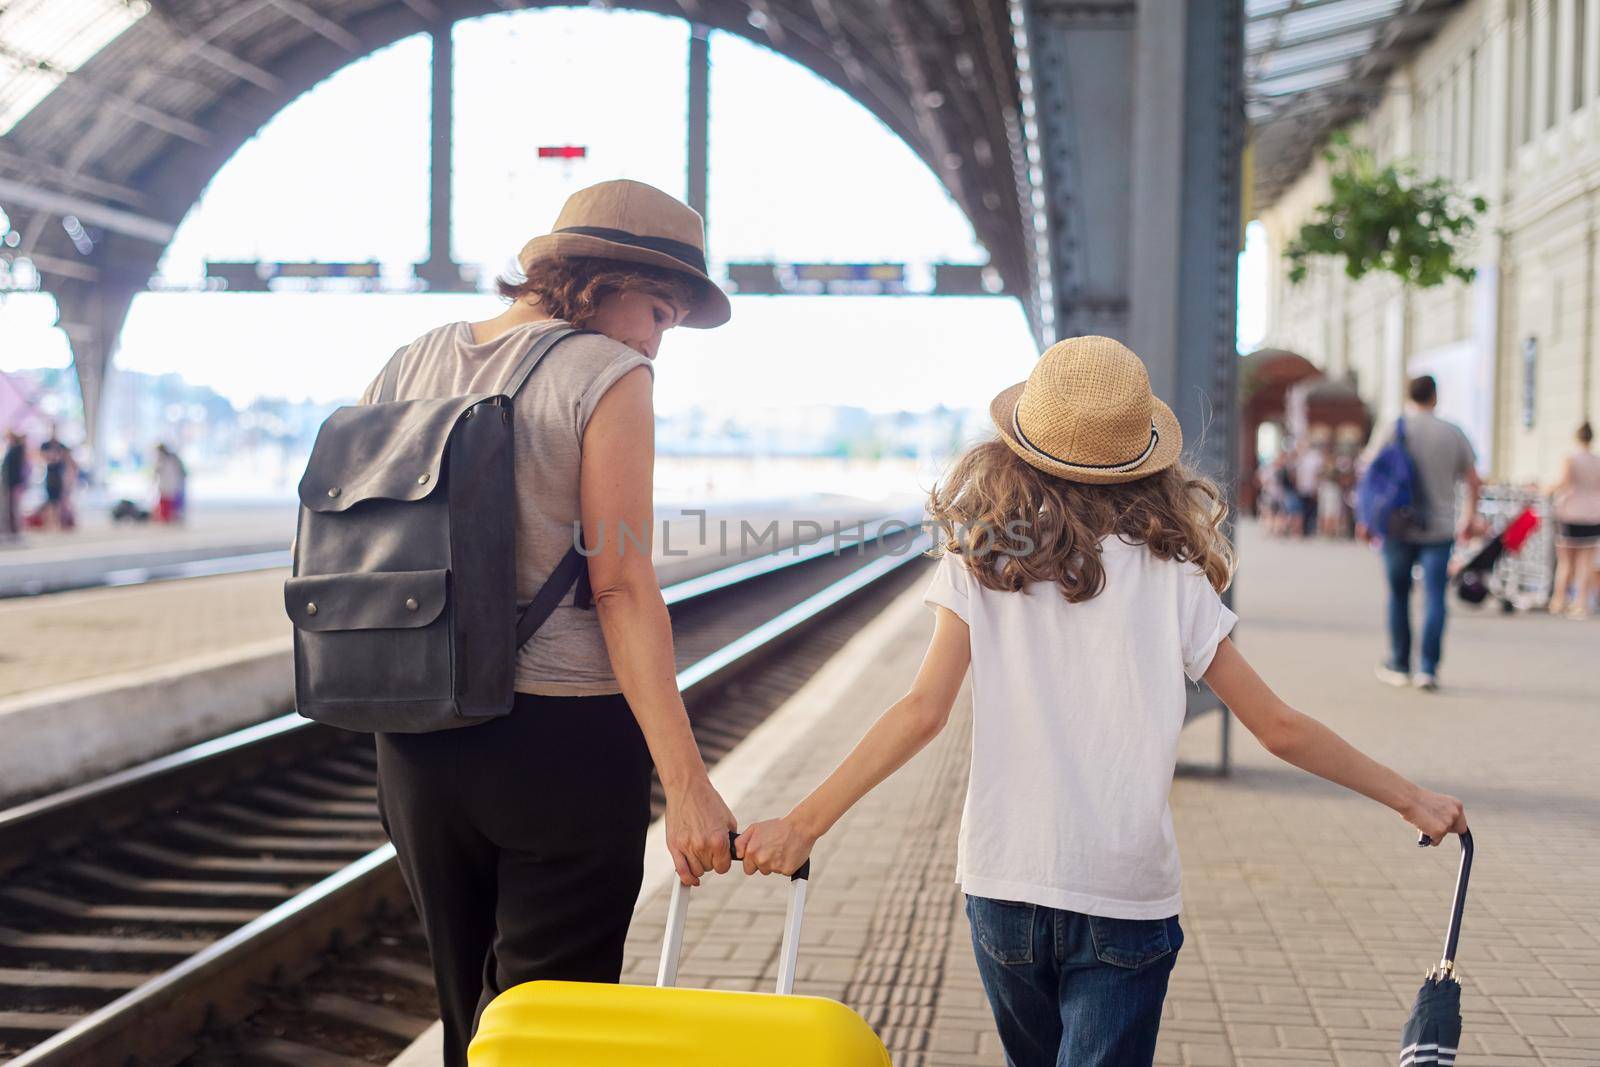 Happy mother and daughter child walking together at railway station with luggage suitcase, back view. Travel, tourism, transportation, family concept